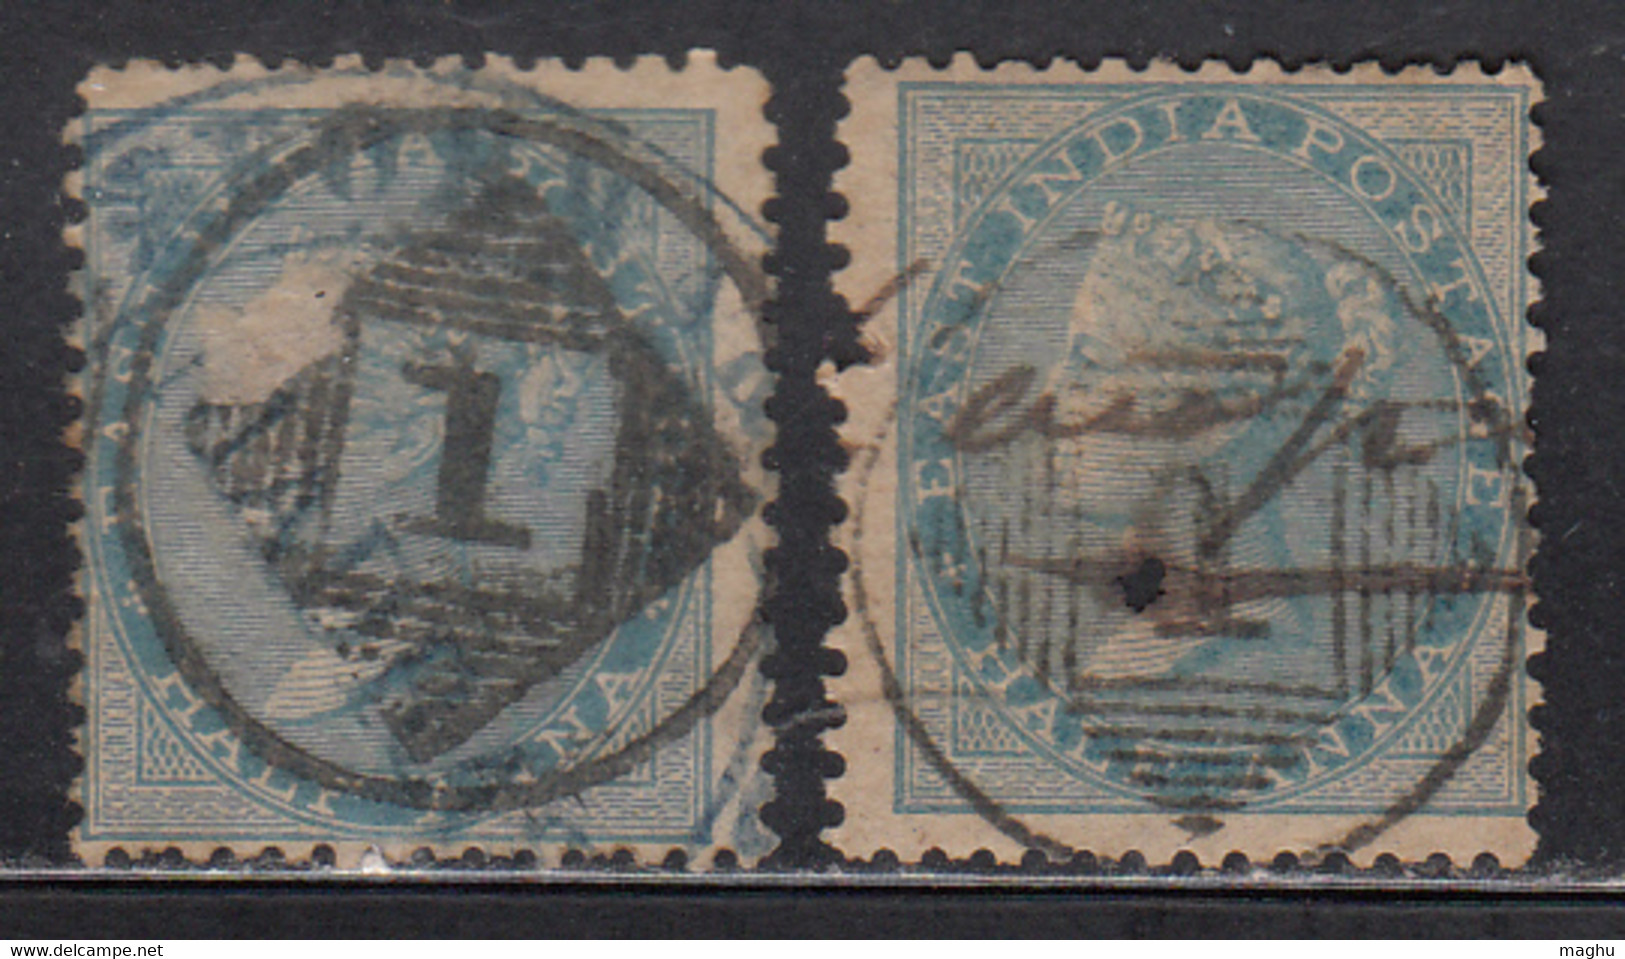 '1' Madras X 2 Diff. Varity Madras Circle/ Cooper / Renouf Type 9, British East India Used, Early Indian Cancellations - 1854 Britische Indien-Kompanie